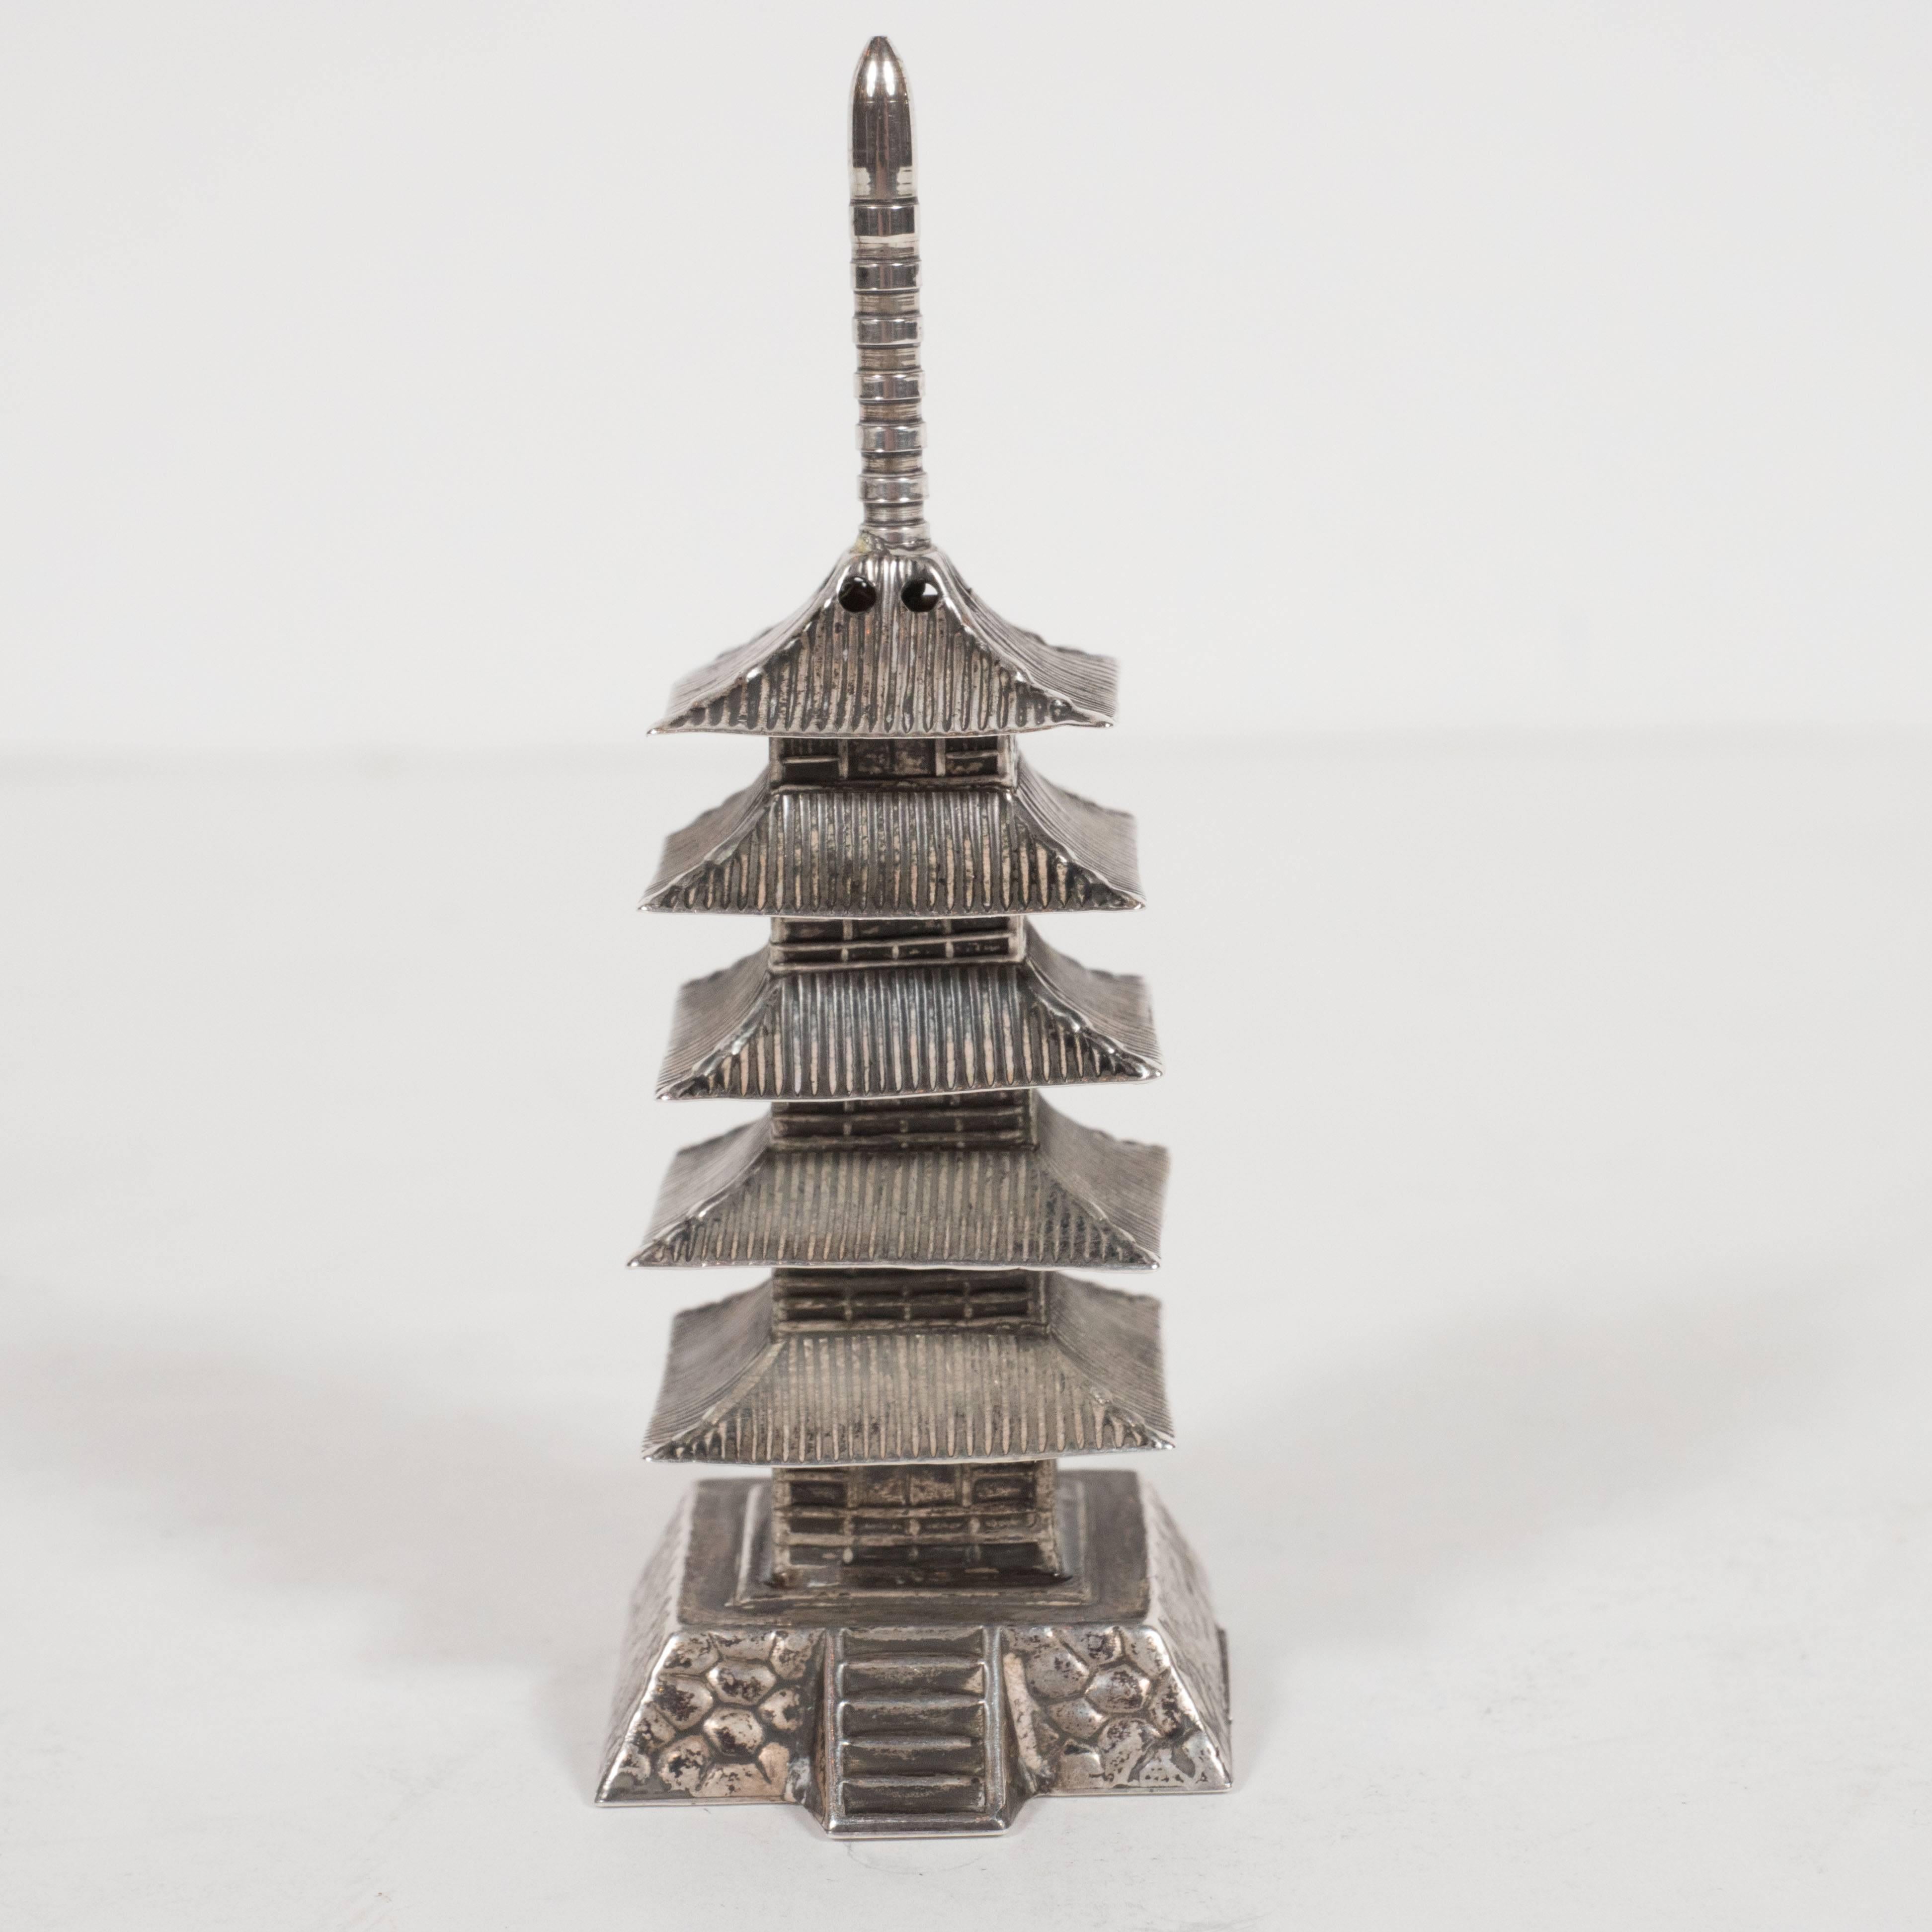 Composed of 59 grams of sterling silver, this elegant set of salt and pepper shakers were modelled after the famed Ninna-Ji temple in Kyoto. They featured a Pagoda style design, complete with a staircase, a stone wall, and a tiered roof crowned with